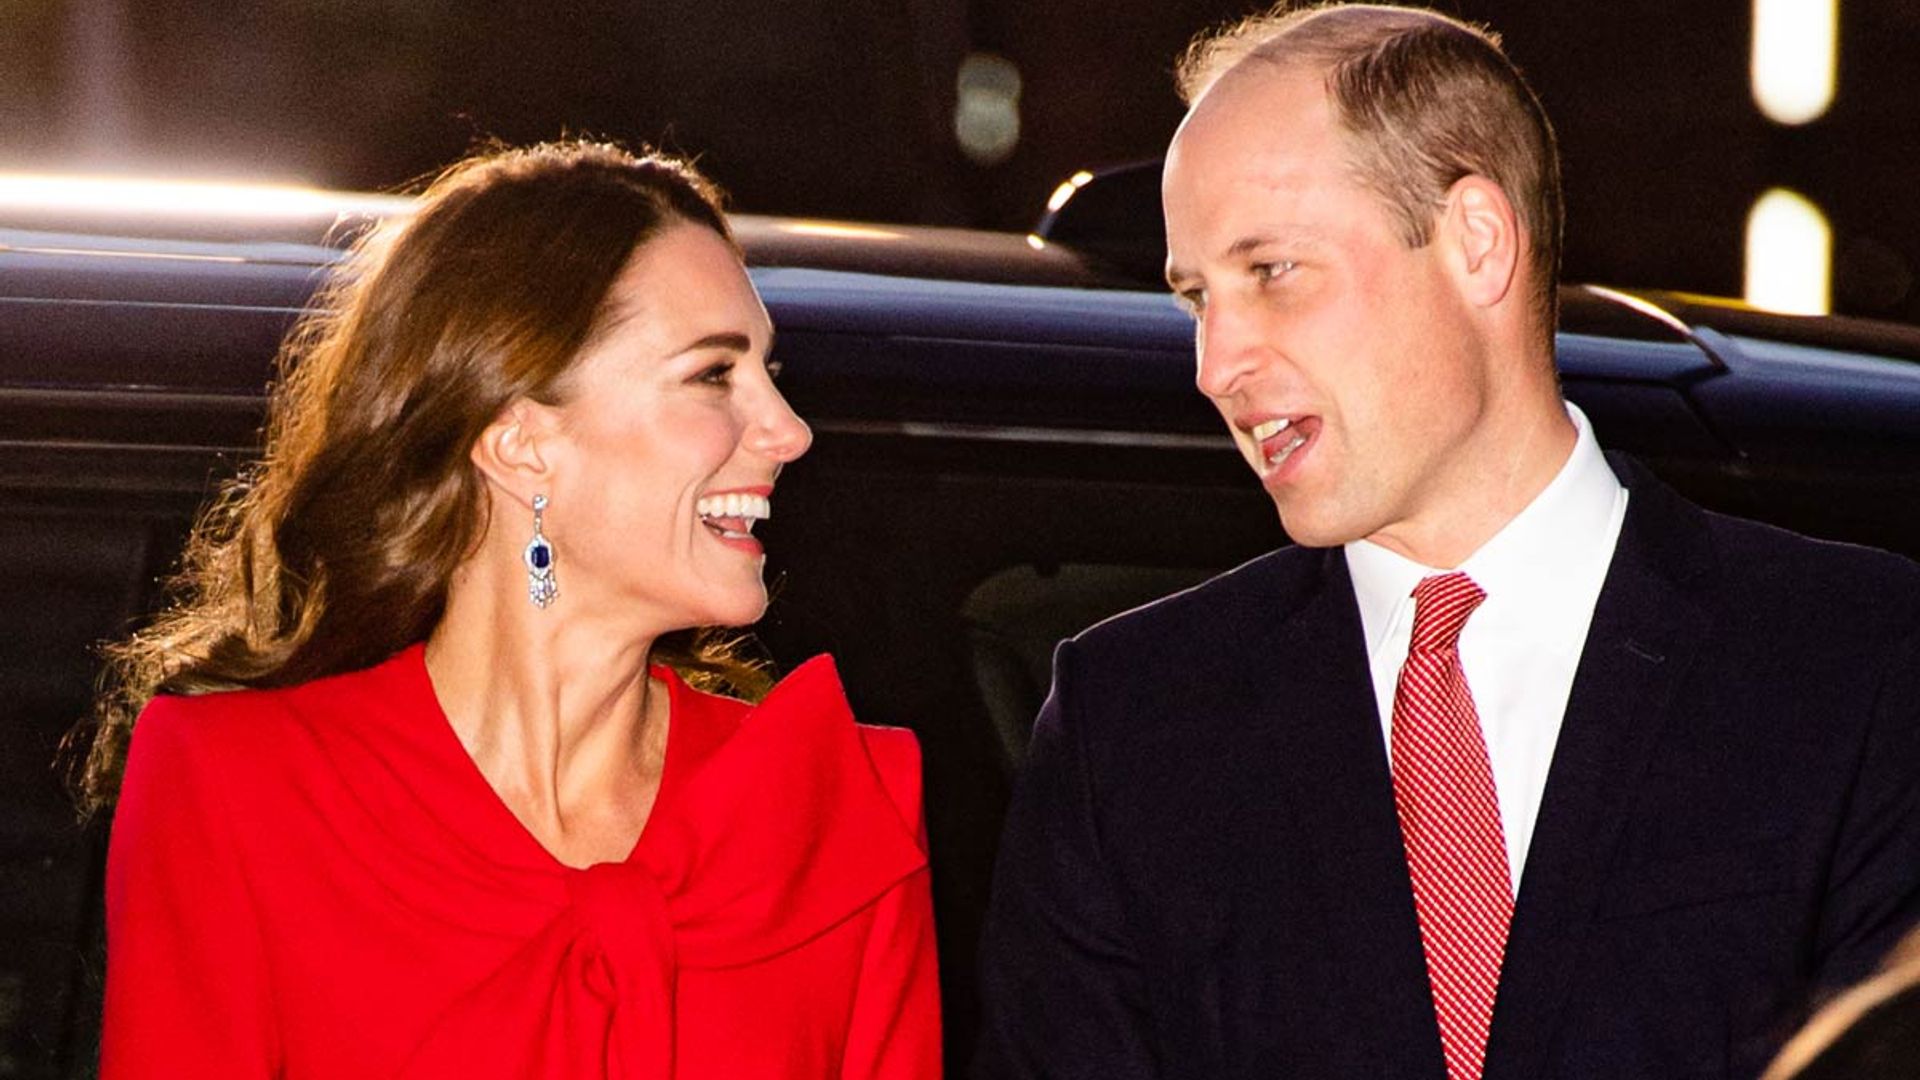 Kate Middleton celebrates unexpected Christmas joy after debut piano performance